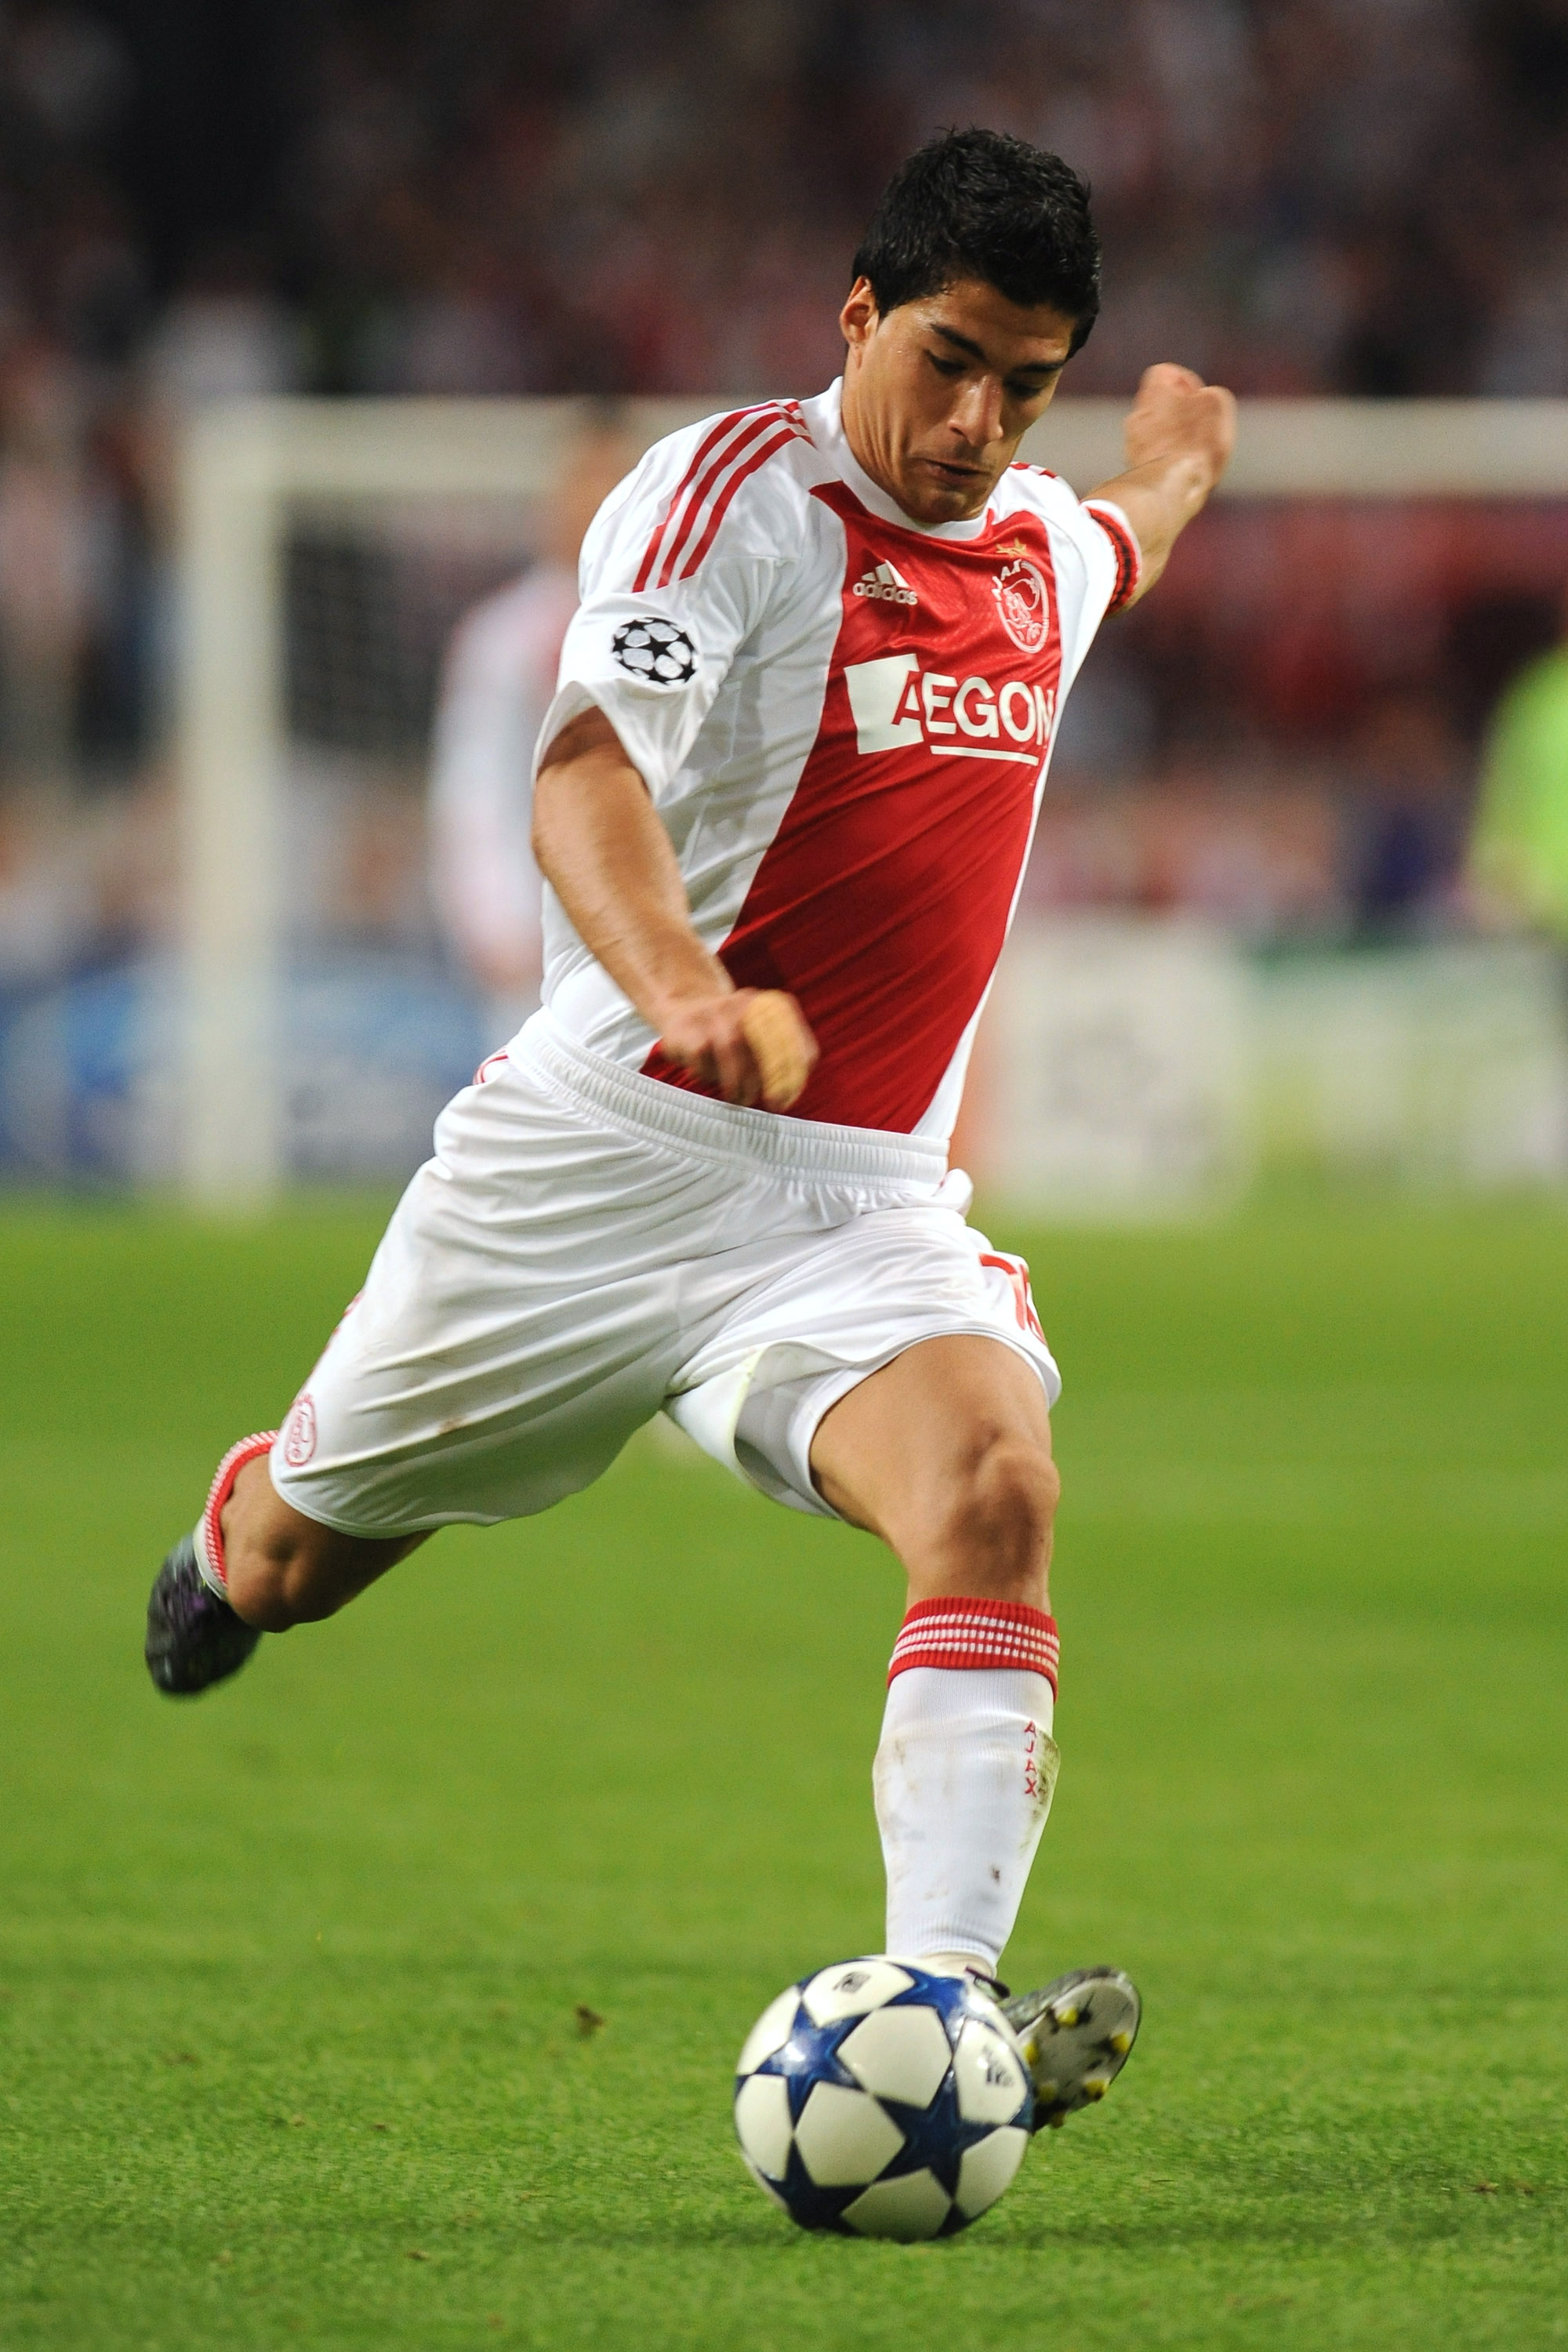 AMSTERDAM, NETHERLANDS - AUGUST 25:  Luis Suarez of AFC Ajax in action during the Champions League Play-off match between AFC Ajax and FC Dynamo Kiev at Amsterdam Arena on August 25, 2010 in Amsterdam, Netherlands.  (Photo by Valerio Pennicino/Getty Image